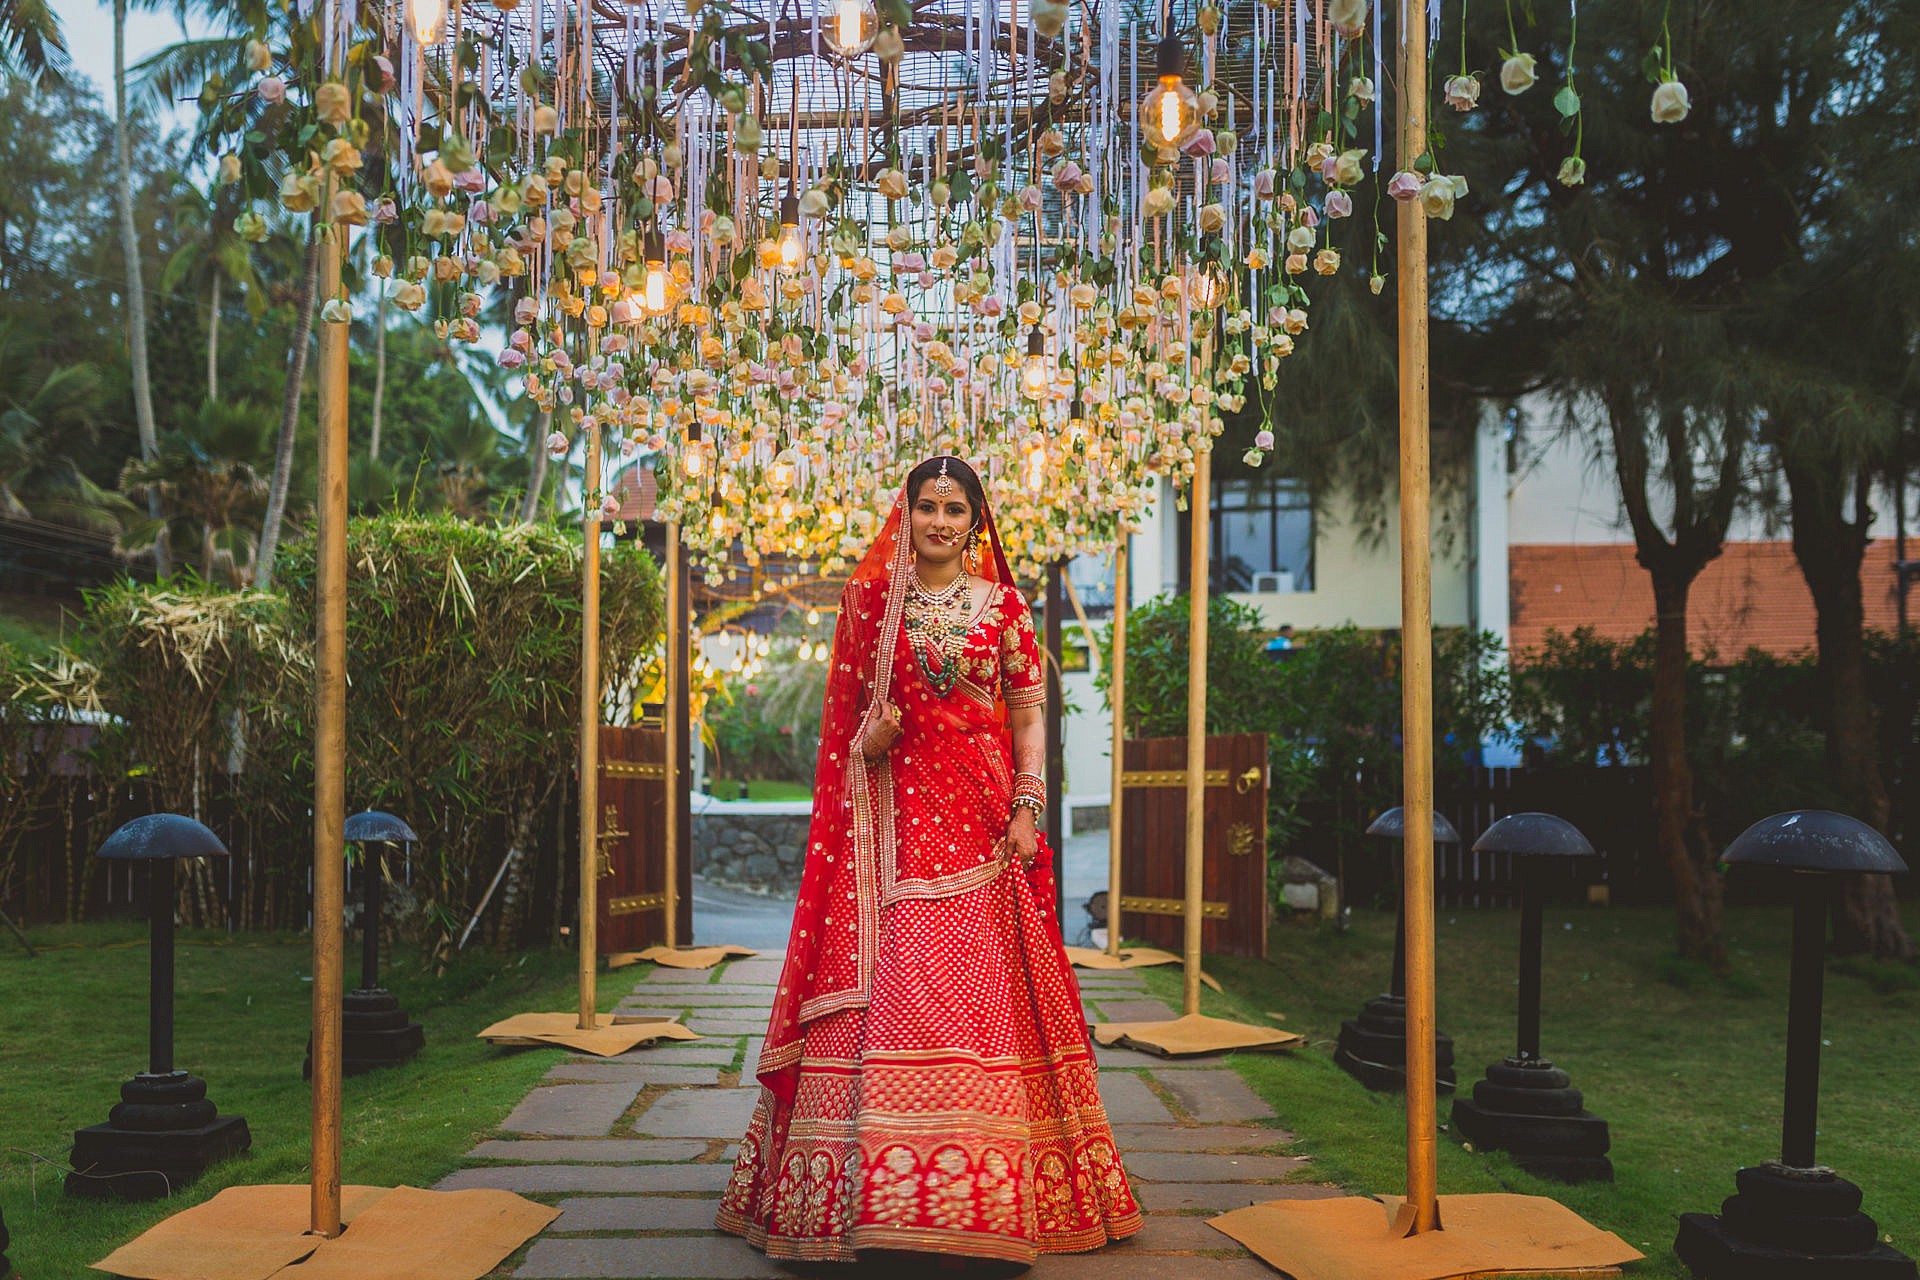 A bride's royal welcome with beautiful lights glimmering above